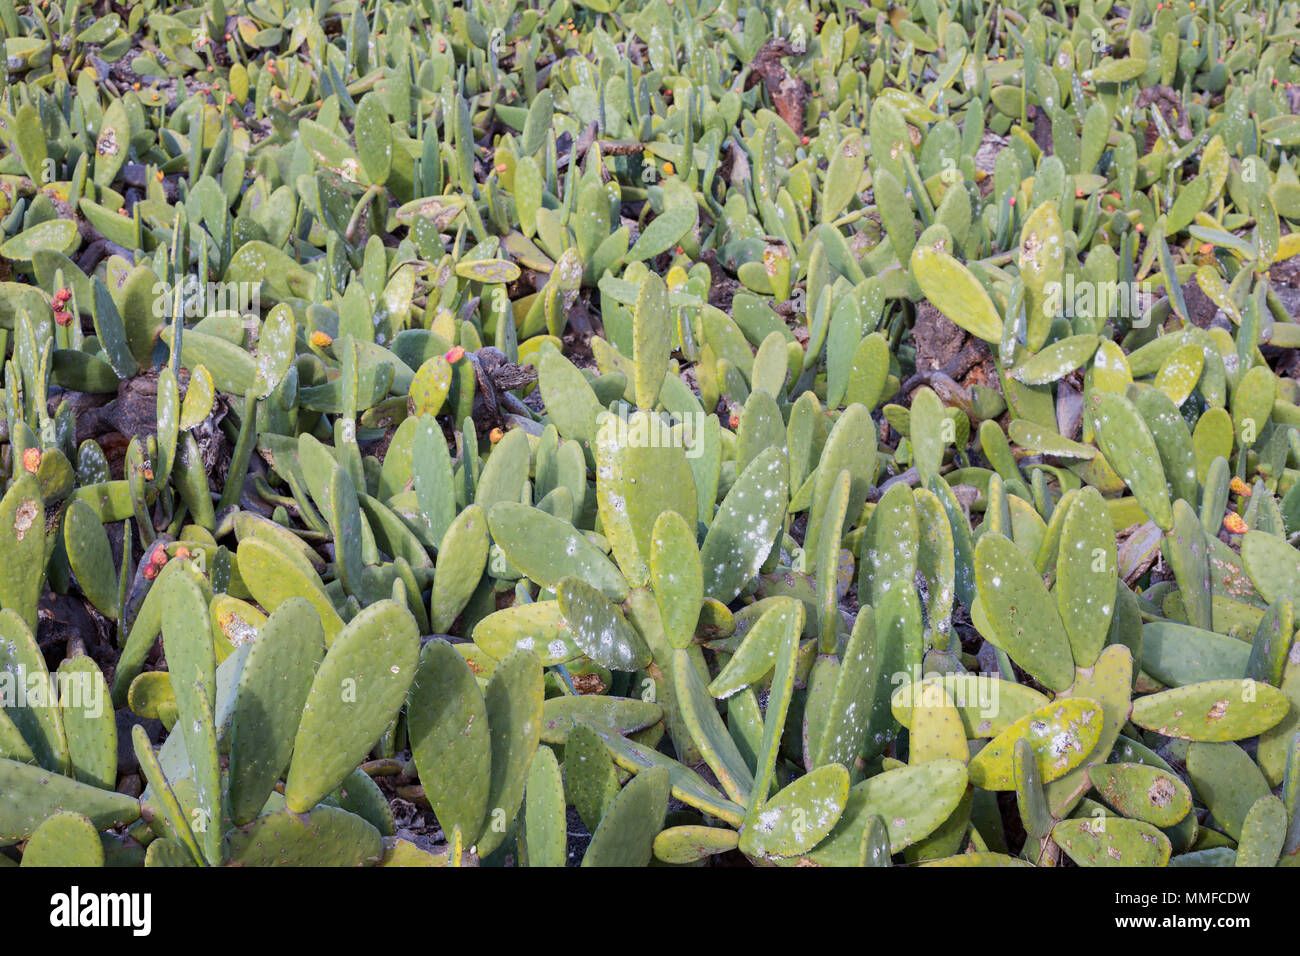 LANZAROTE, CANARY ISLANDS, SPAIN, EUROPE: Canary farmland of cacti growing for Cochineal production. Stock Photo